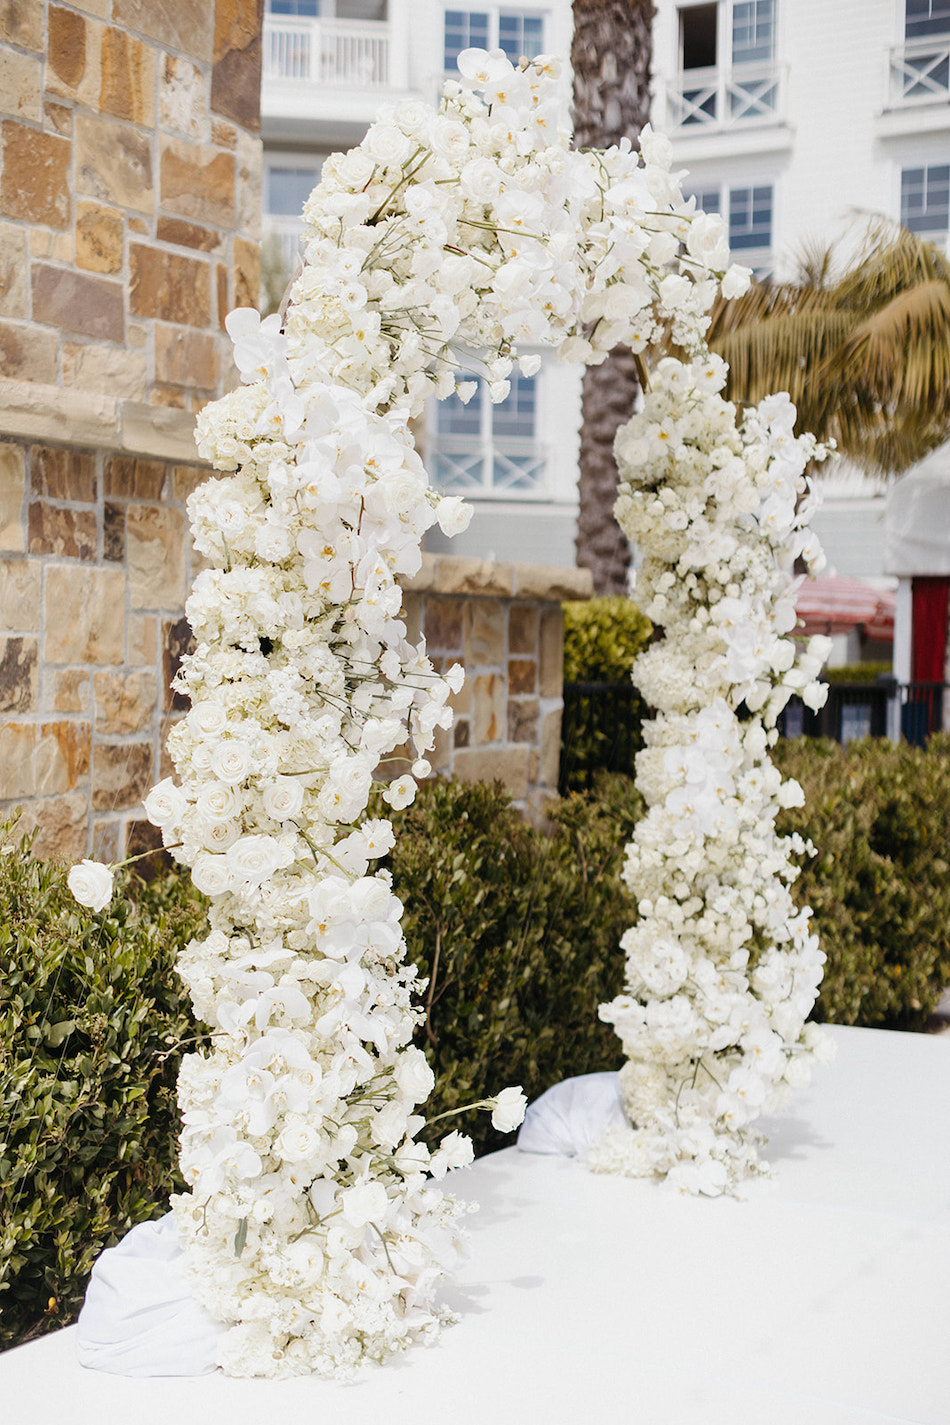 floral design, florist, wedding florist, wedding flowers, orange county weddings, orange county wedding florist, orange county florist, orange county floral design, flowers by cina, white ceremony arch, white blooms, white chuppah